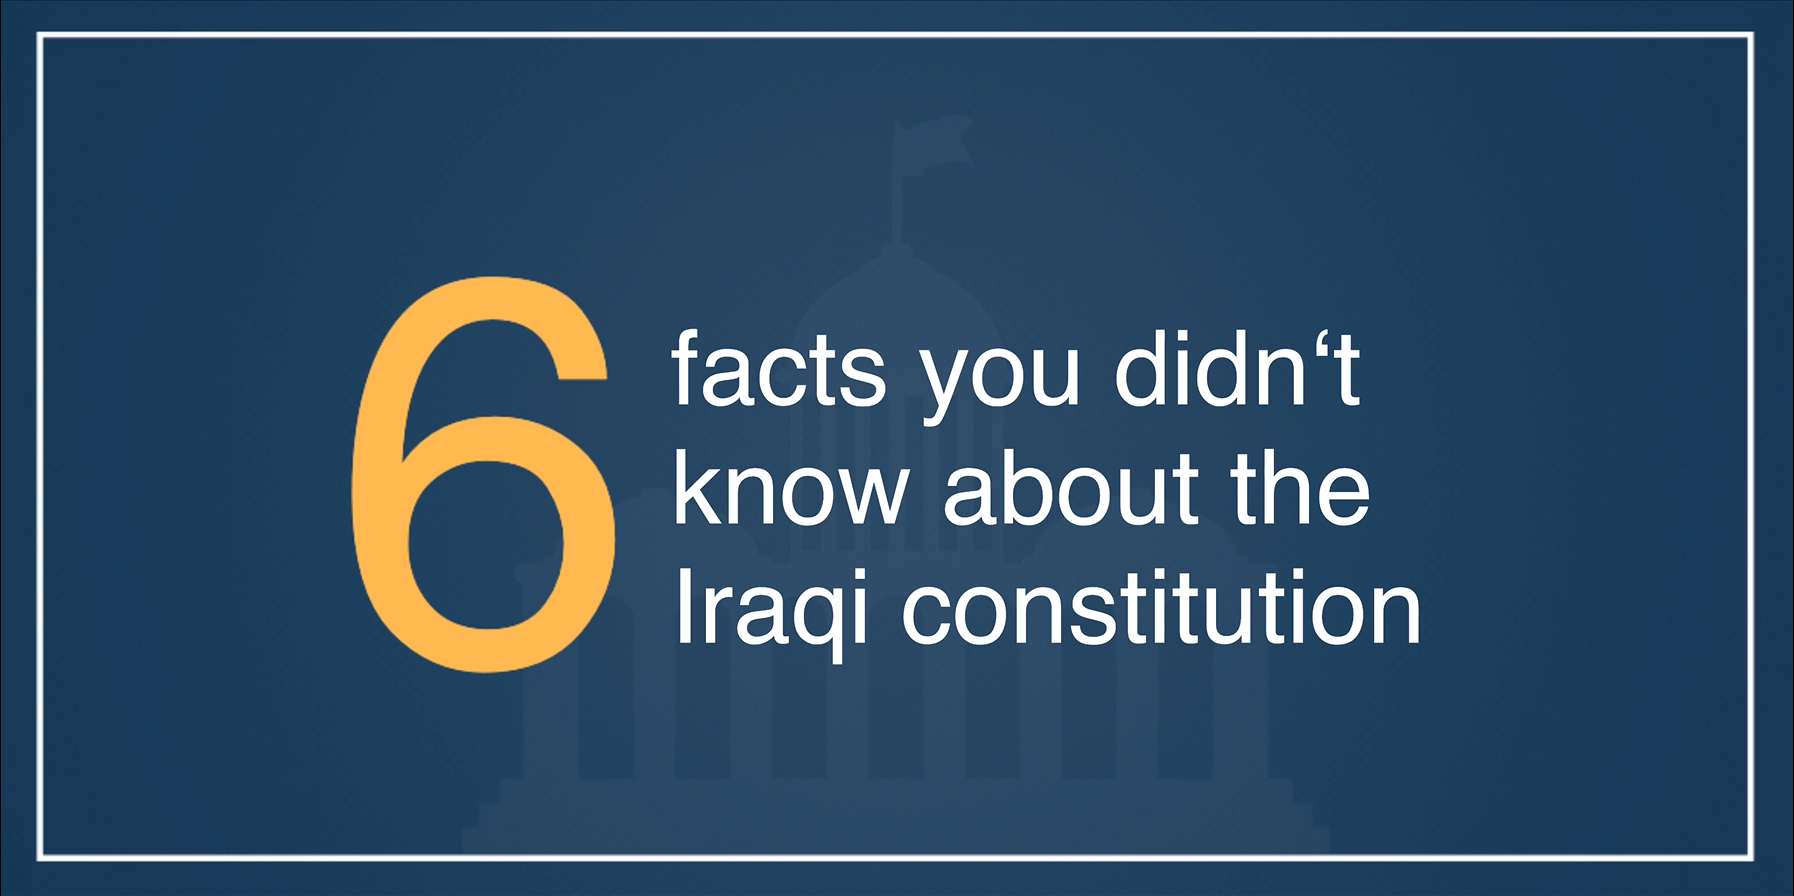 6 Facts you didn’t know about the Iraqi Constitution